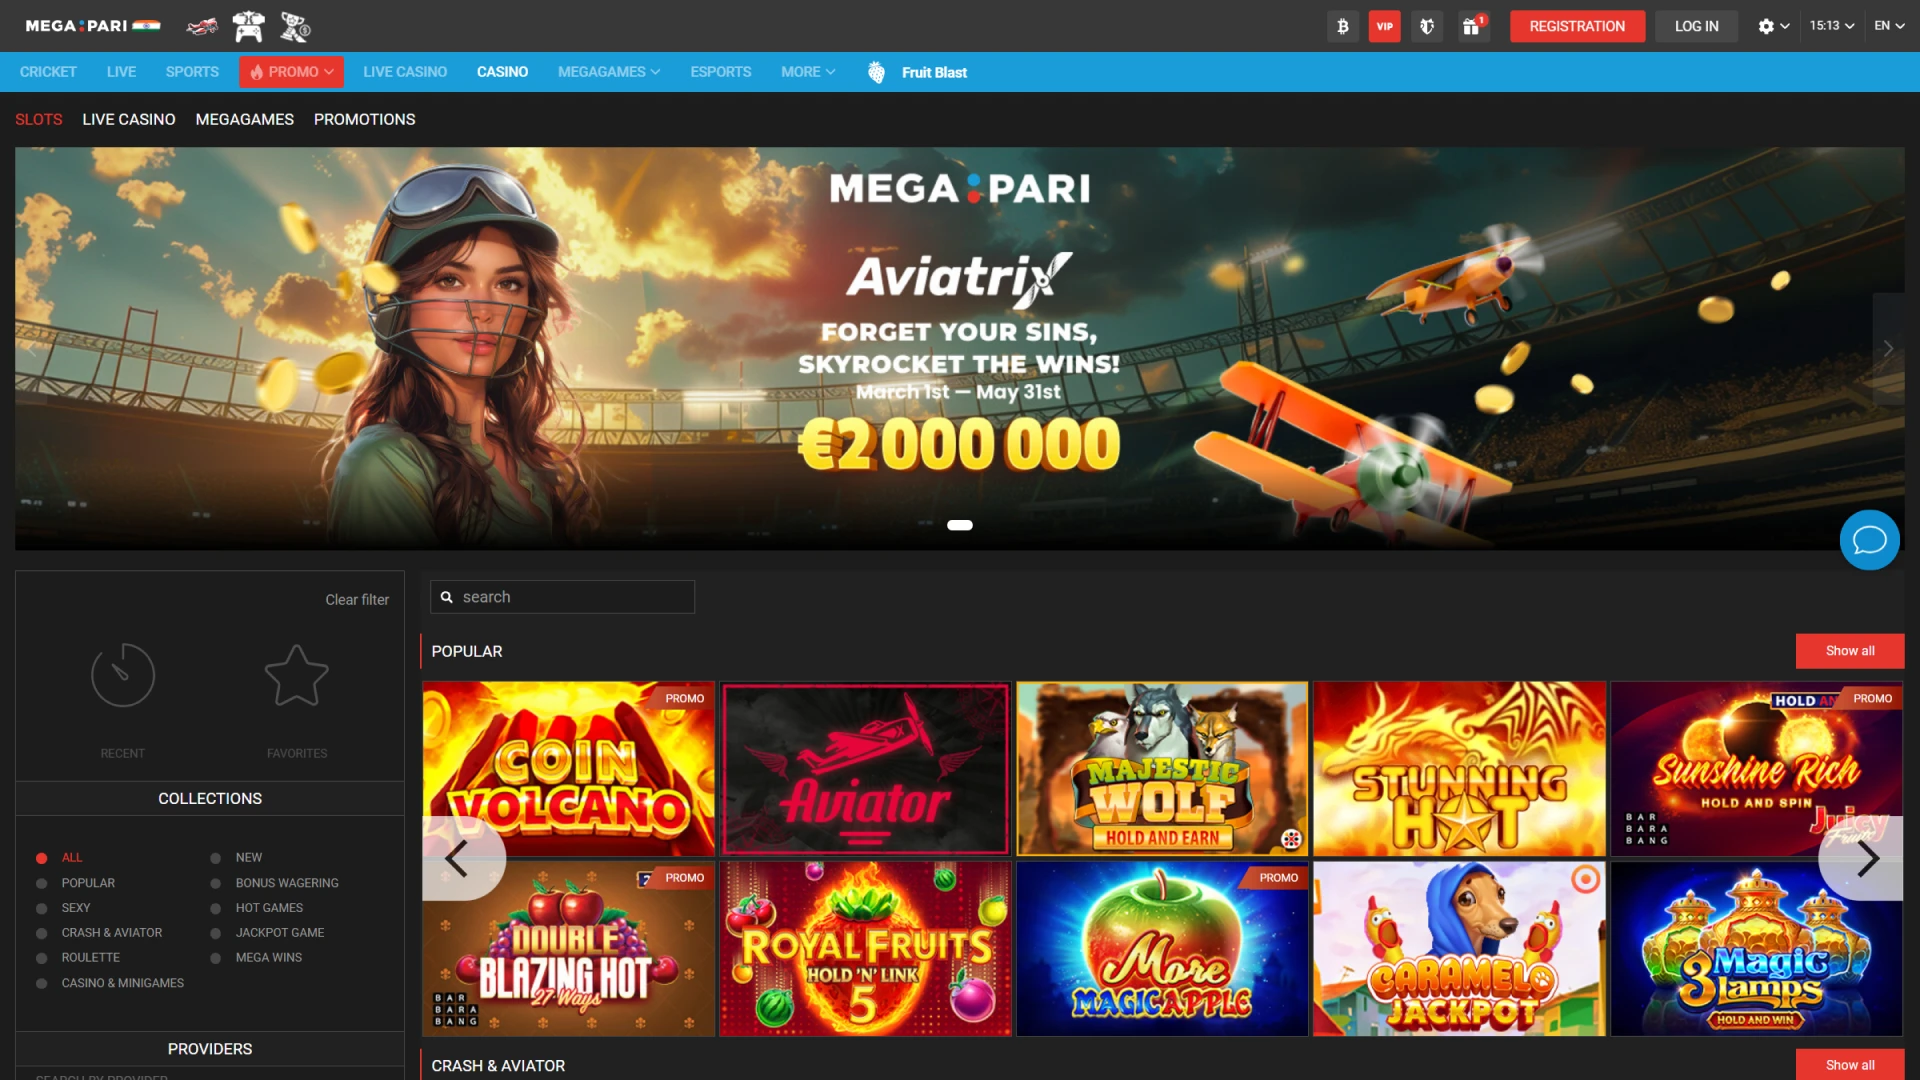 The screenshot shows the online slots section at Megapari casino, which offers a wide variety of games.